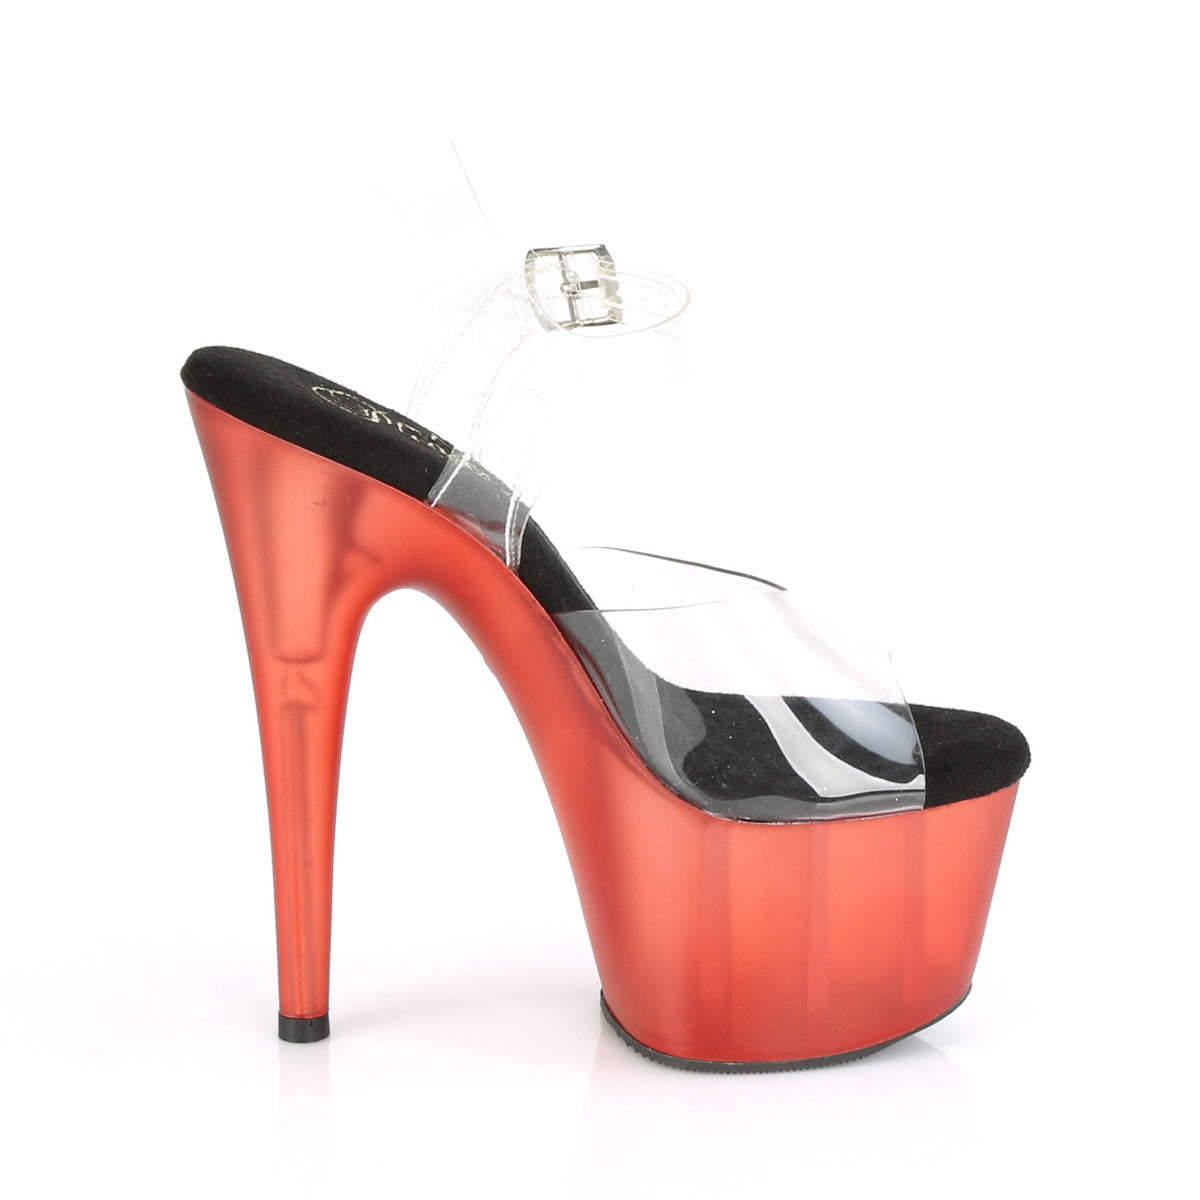 ADORE-708T 7" Heel Clear and Red Frosted Pole Dancing Shoes-Pleaser- Sexy Shoes Fetish Heels